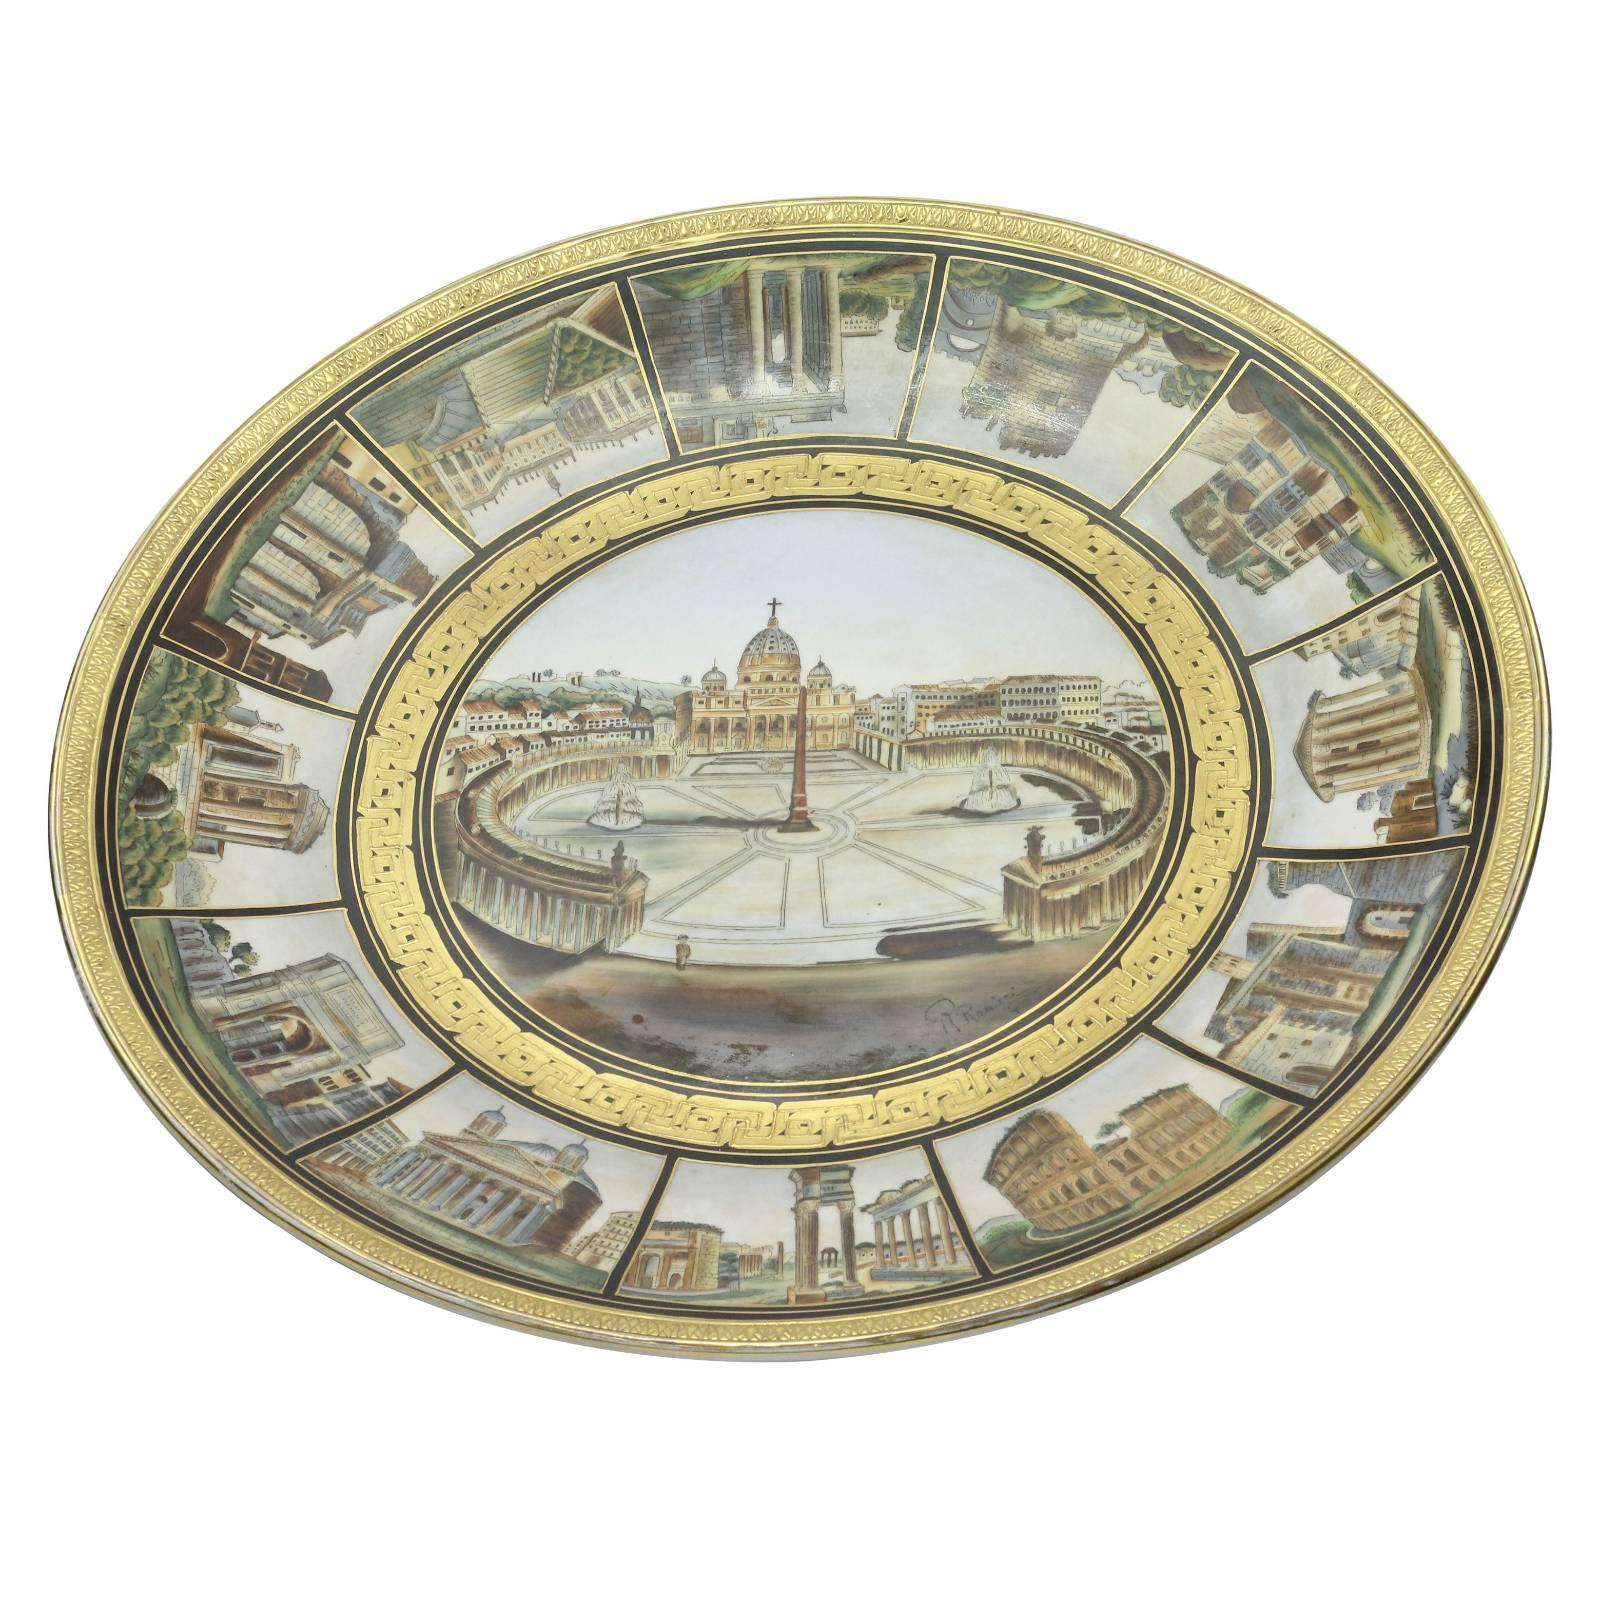 A 19th century Italian porcelain charger that has been hand-painted with popular Italian Grand Tour destinations and gold gilt decoration. Signed Verso, but artist is yet unidentified.